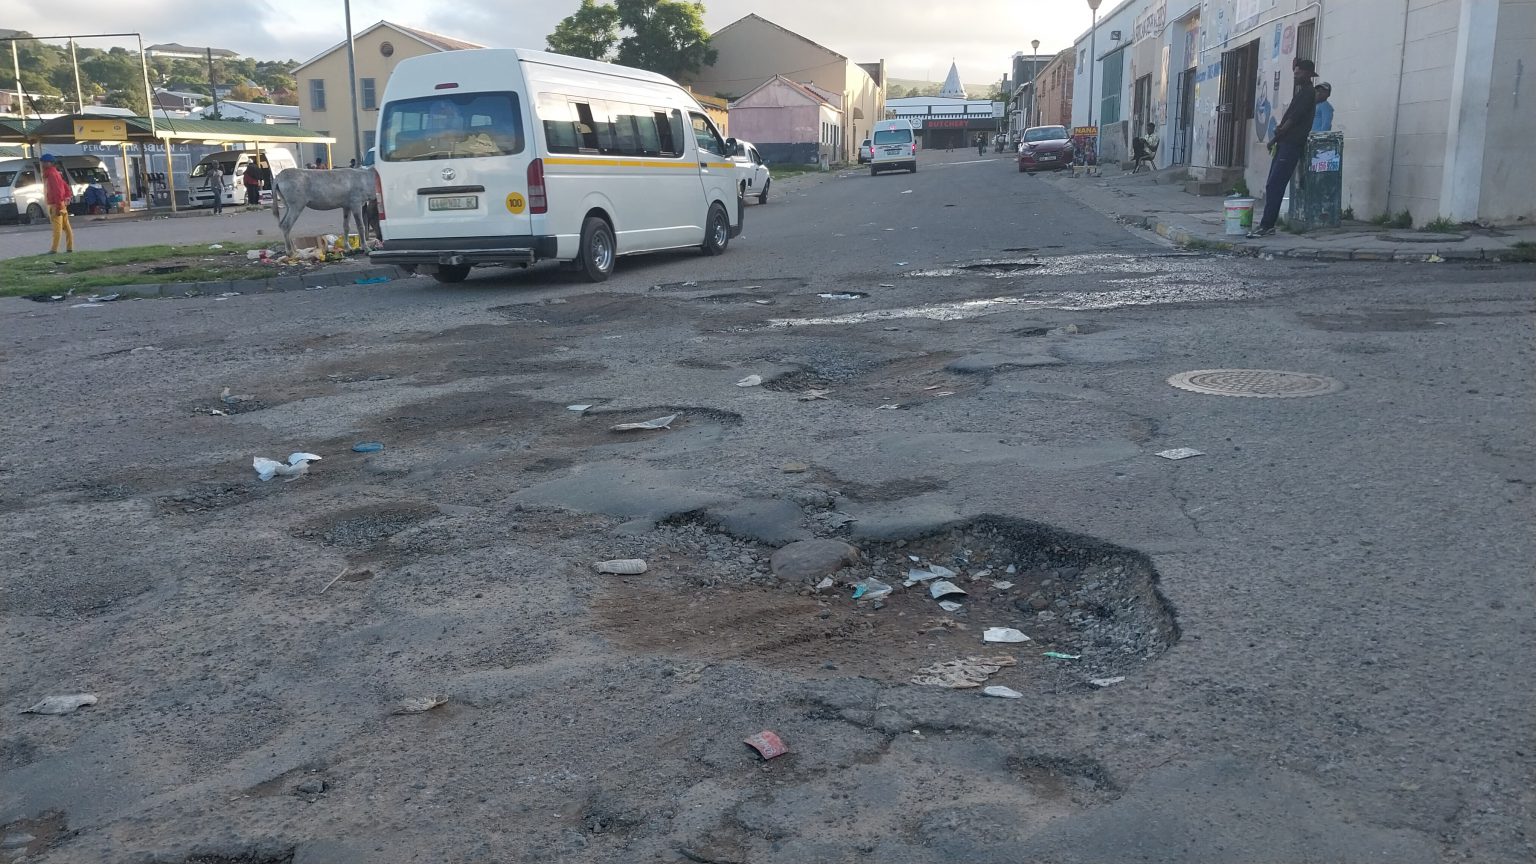 Bad roads are a common sight in the Makana Municipality. It is hoped that the recently secured grant funding will go a long way in improving the situation. Photo: Luvuyo Mjekula